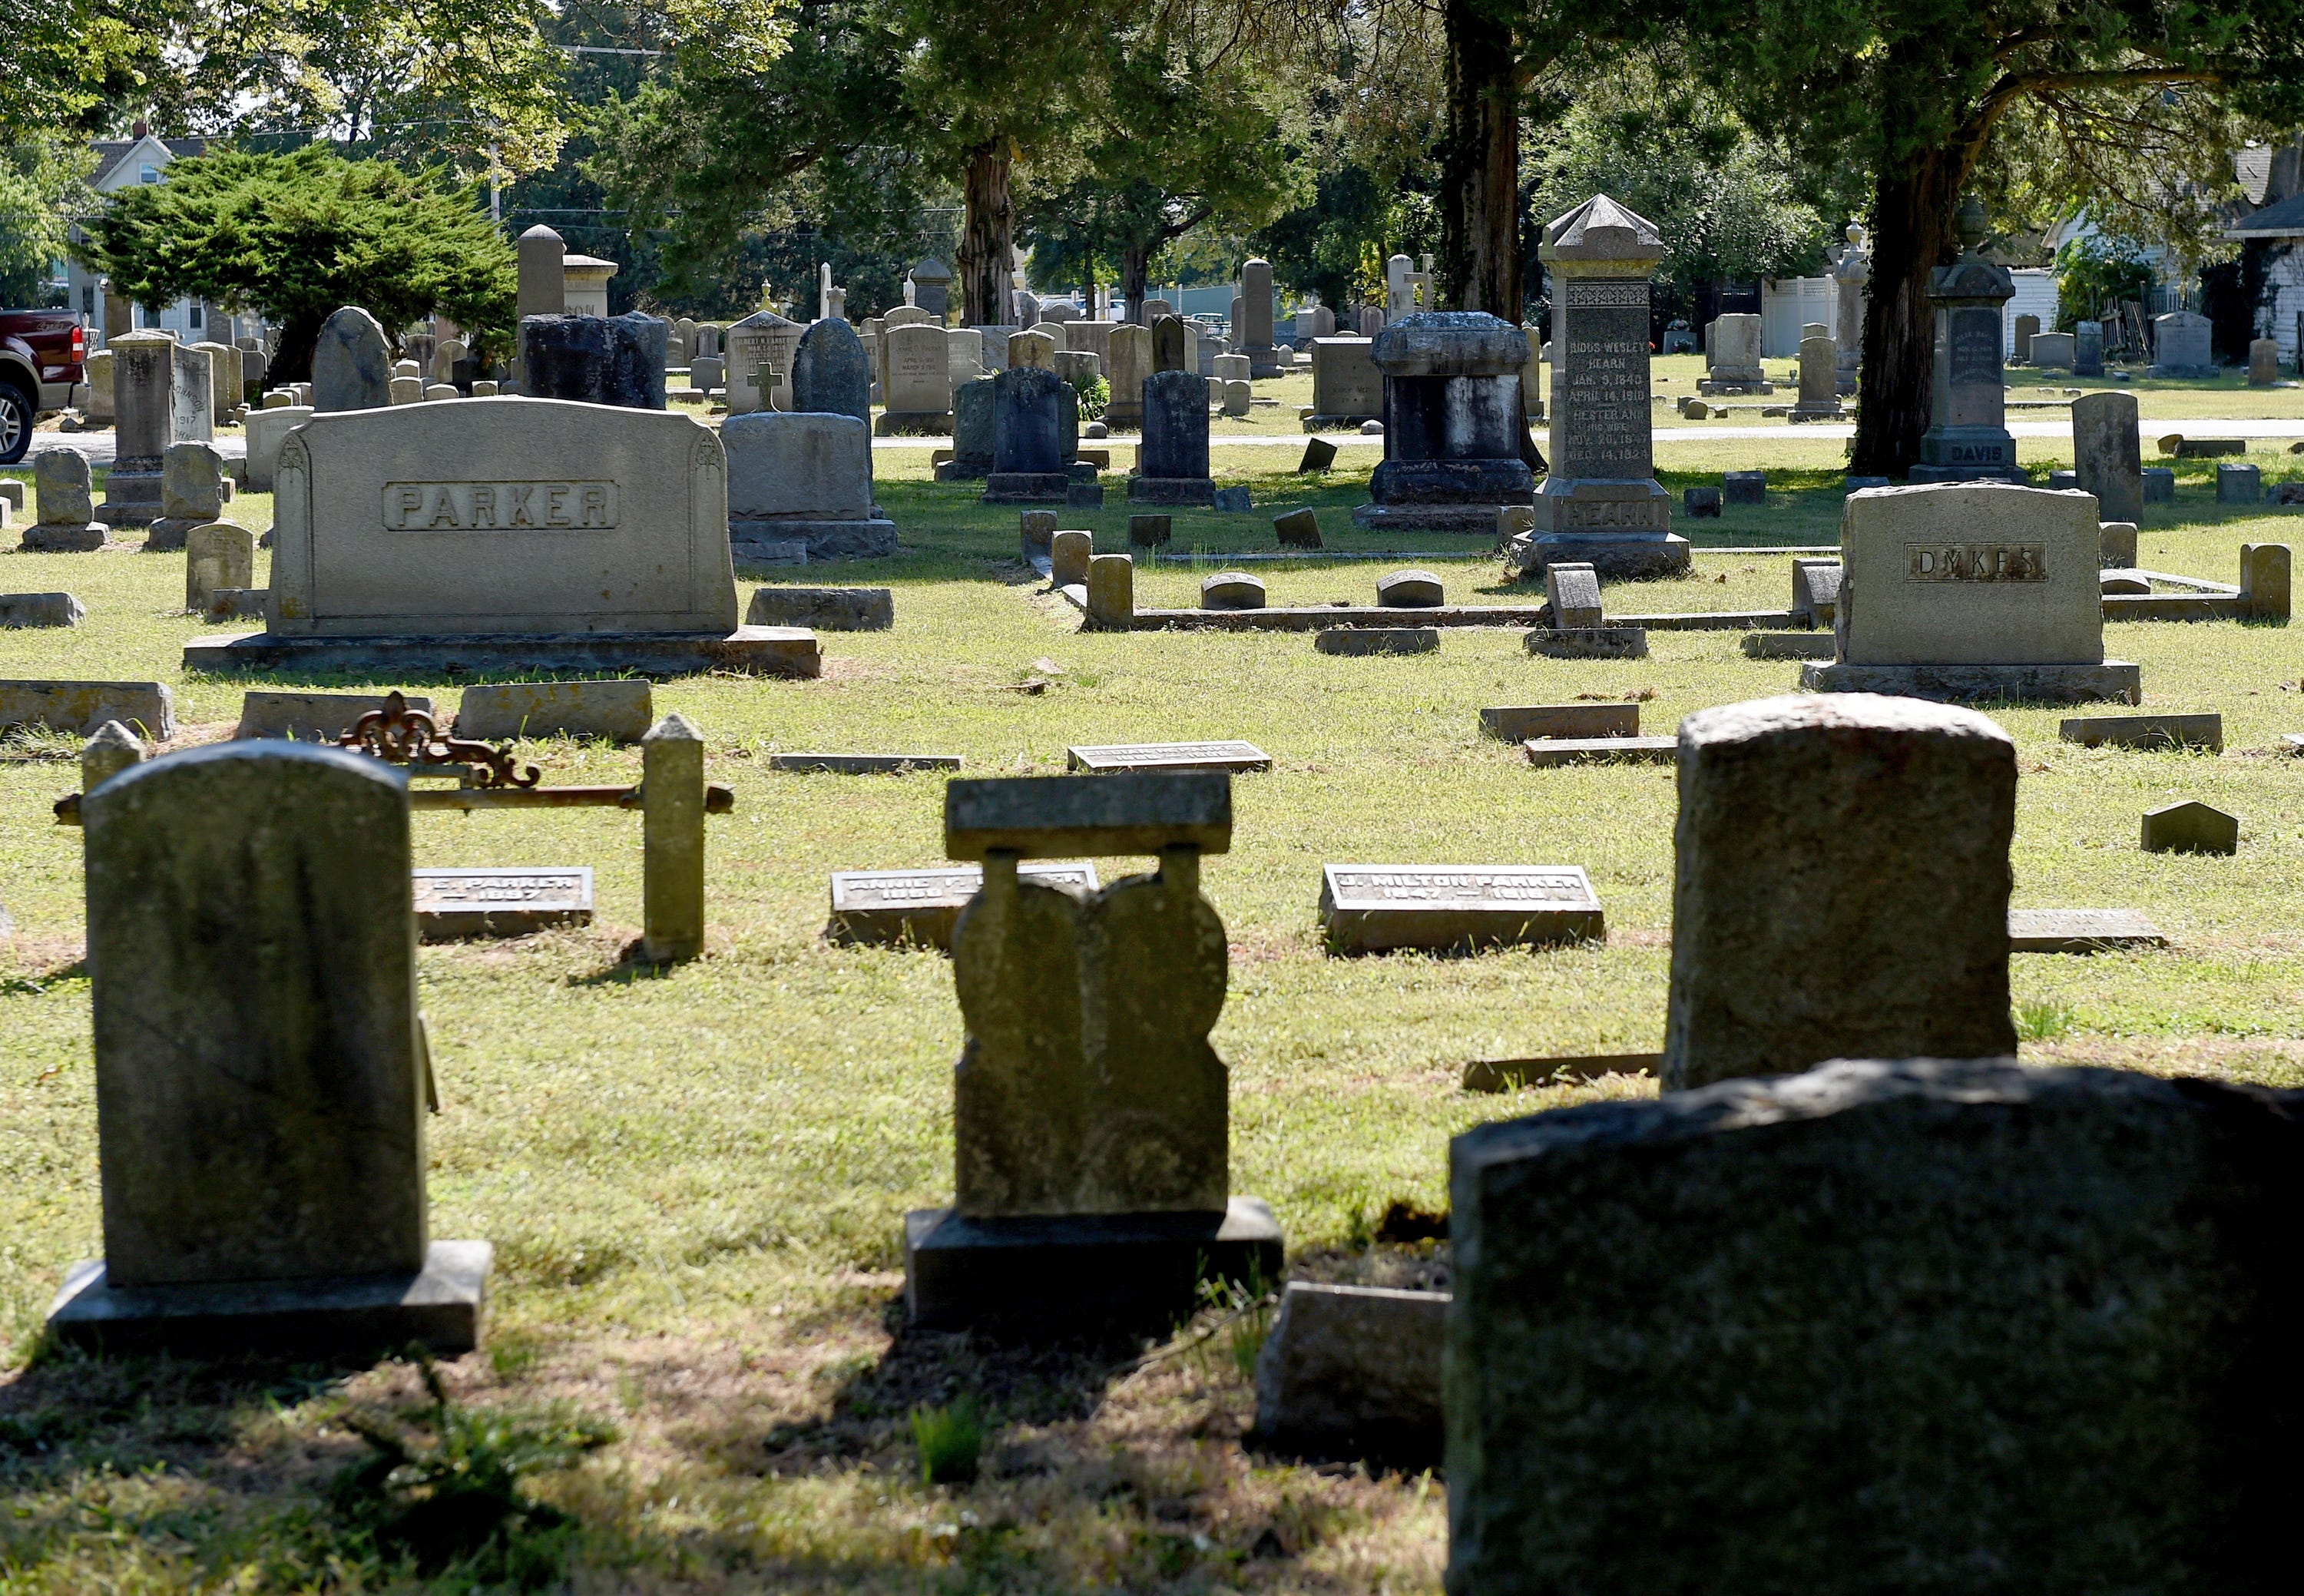 Unmarked graves: How hundreds at local cemetery